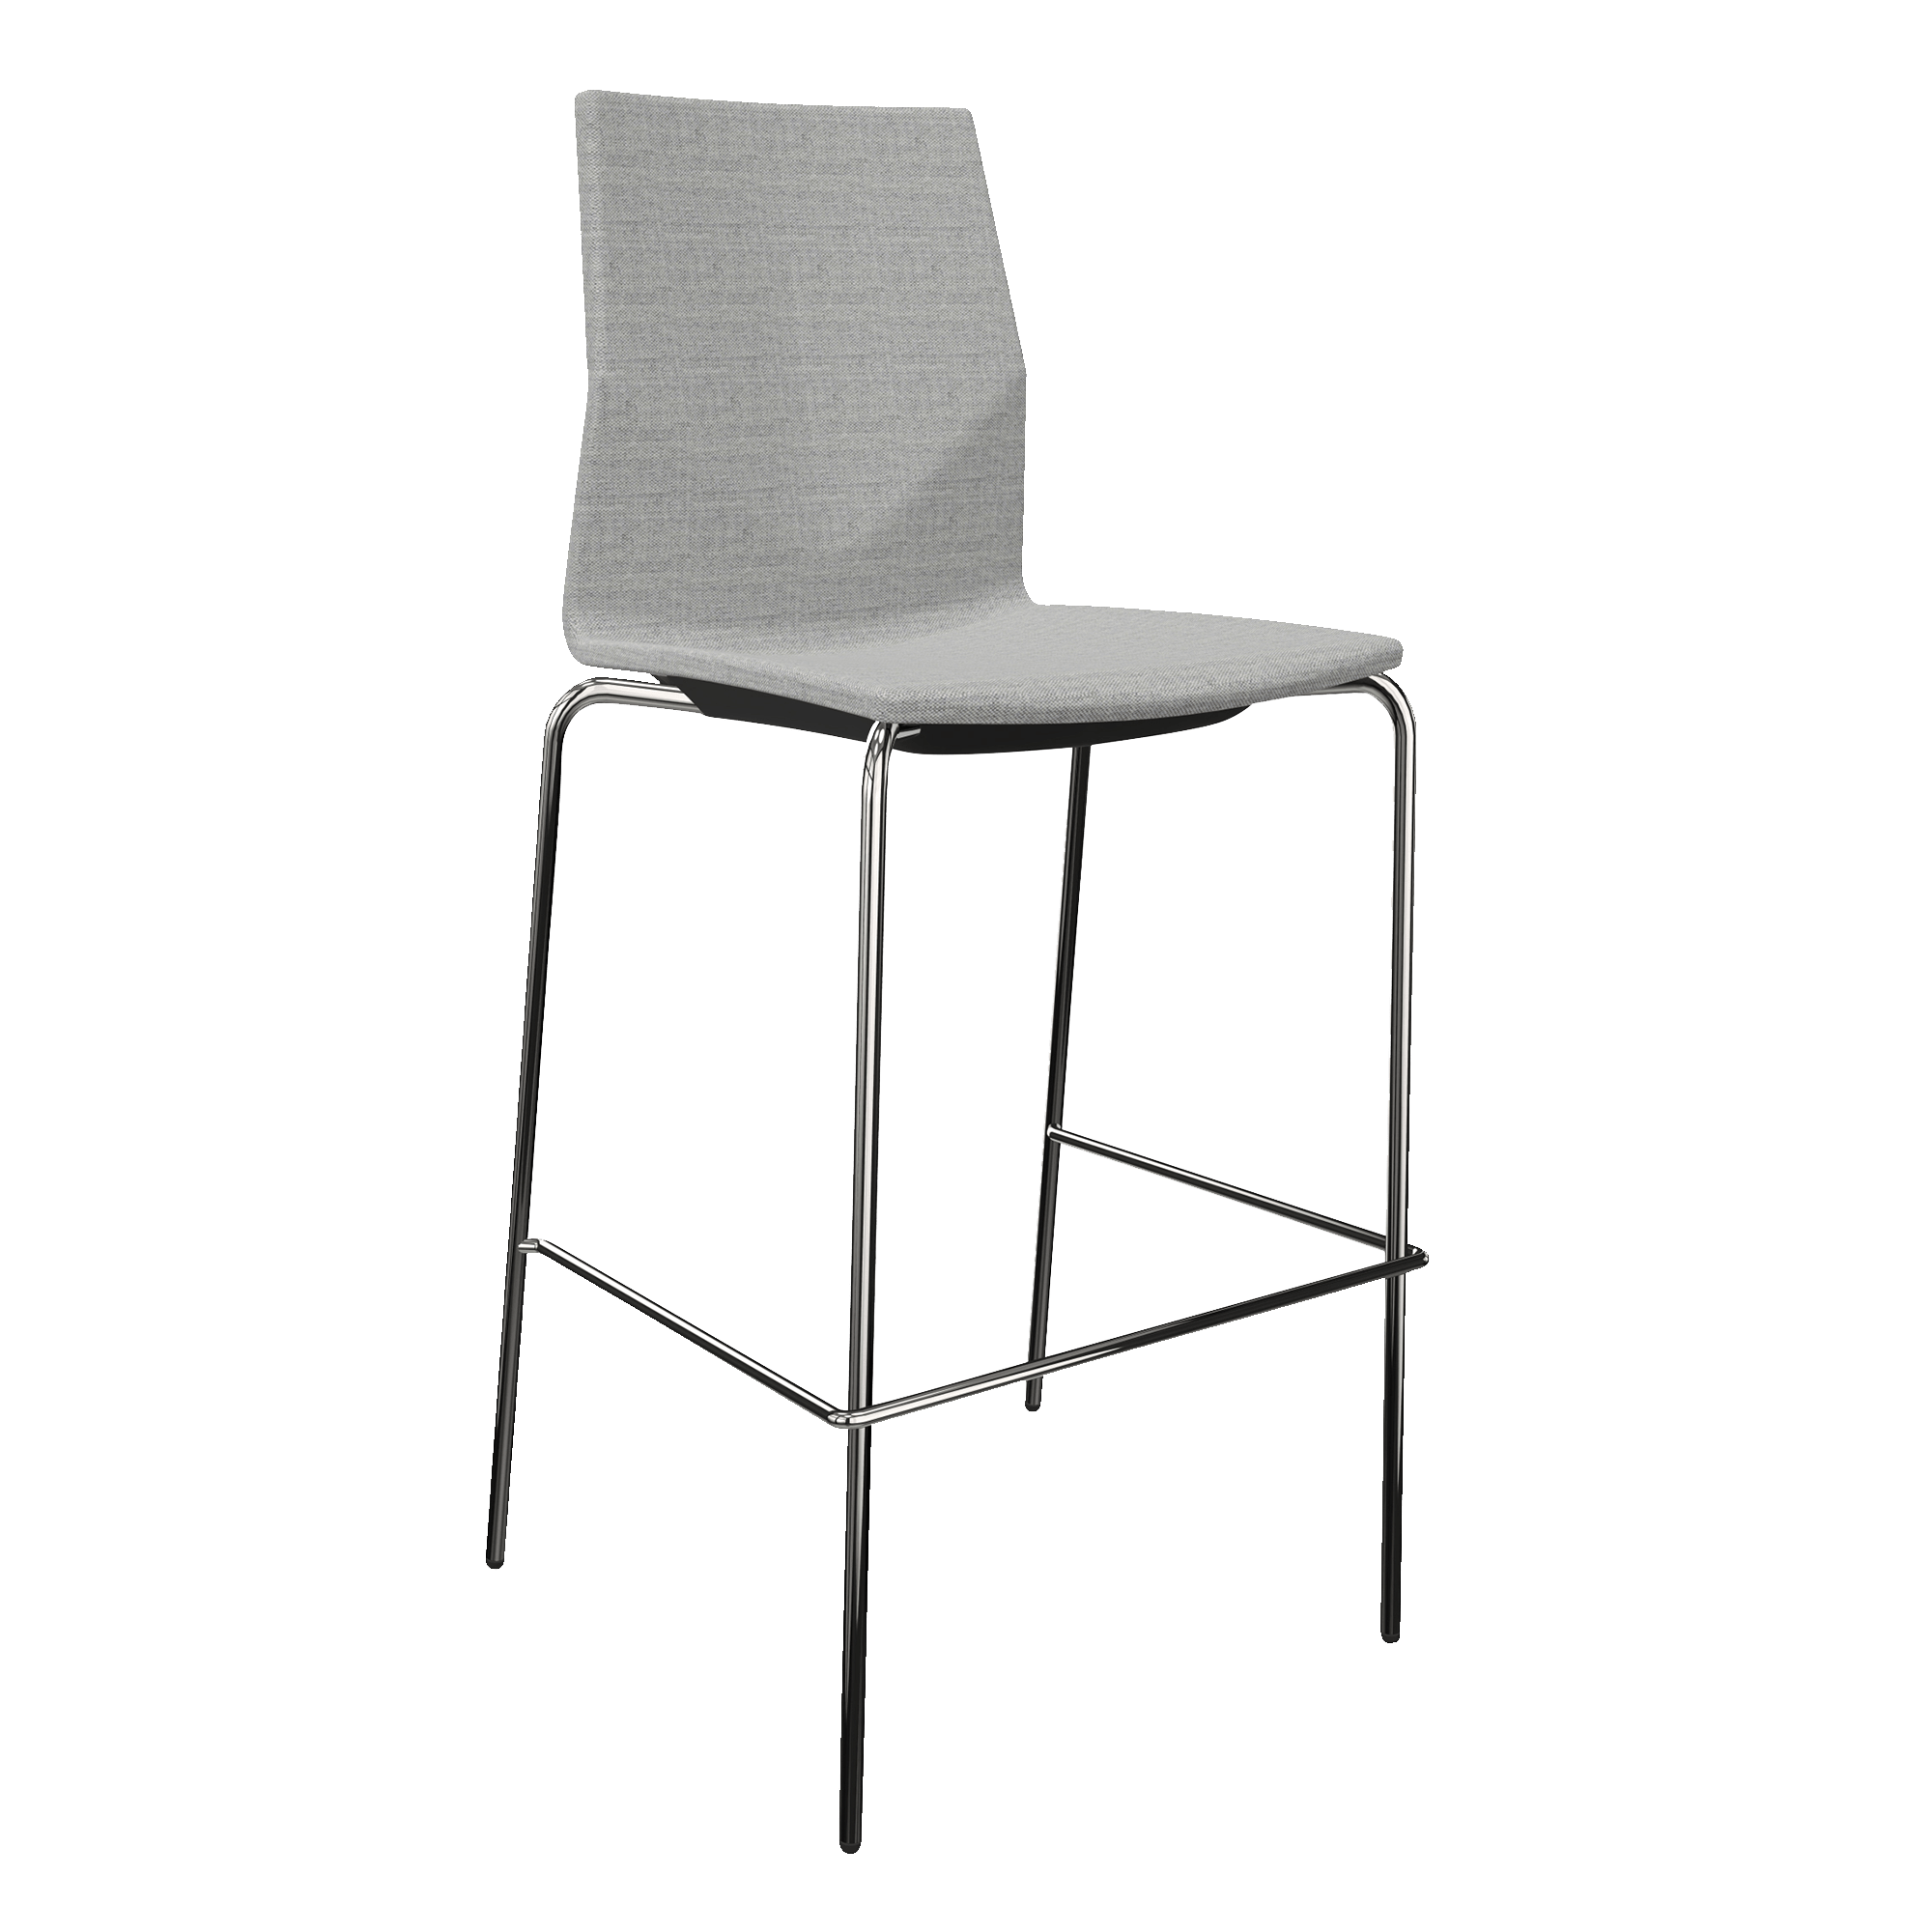 Mid height counter chair with grey seat and 4 chrome legs